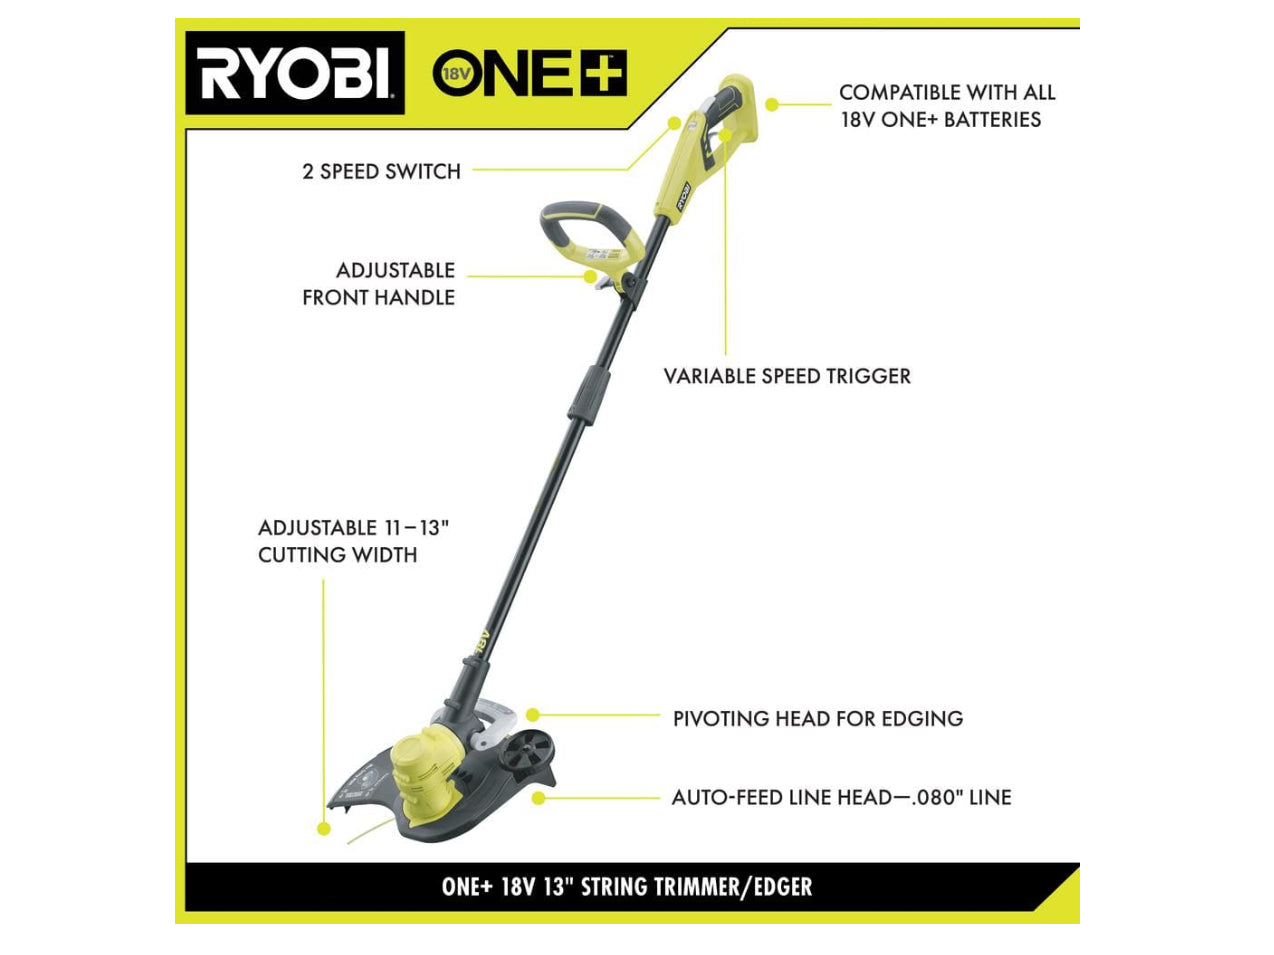 RYOBI ONE+ 18V Cordless Battery String Trimmer/Edger and Jet Fan Blower Combo Kit with 4.0 Ah Battery and Charger - Damaged Box